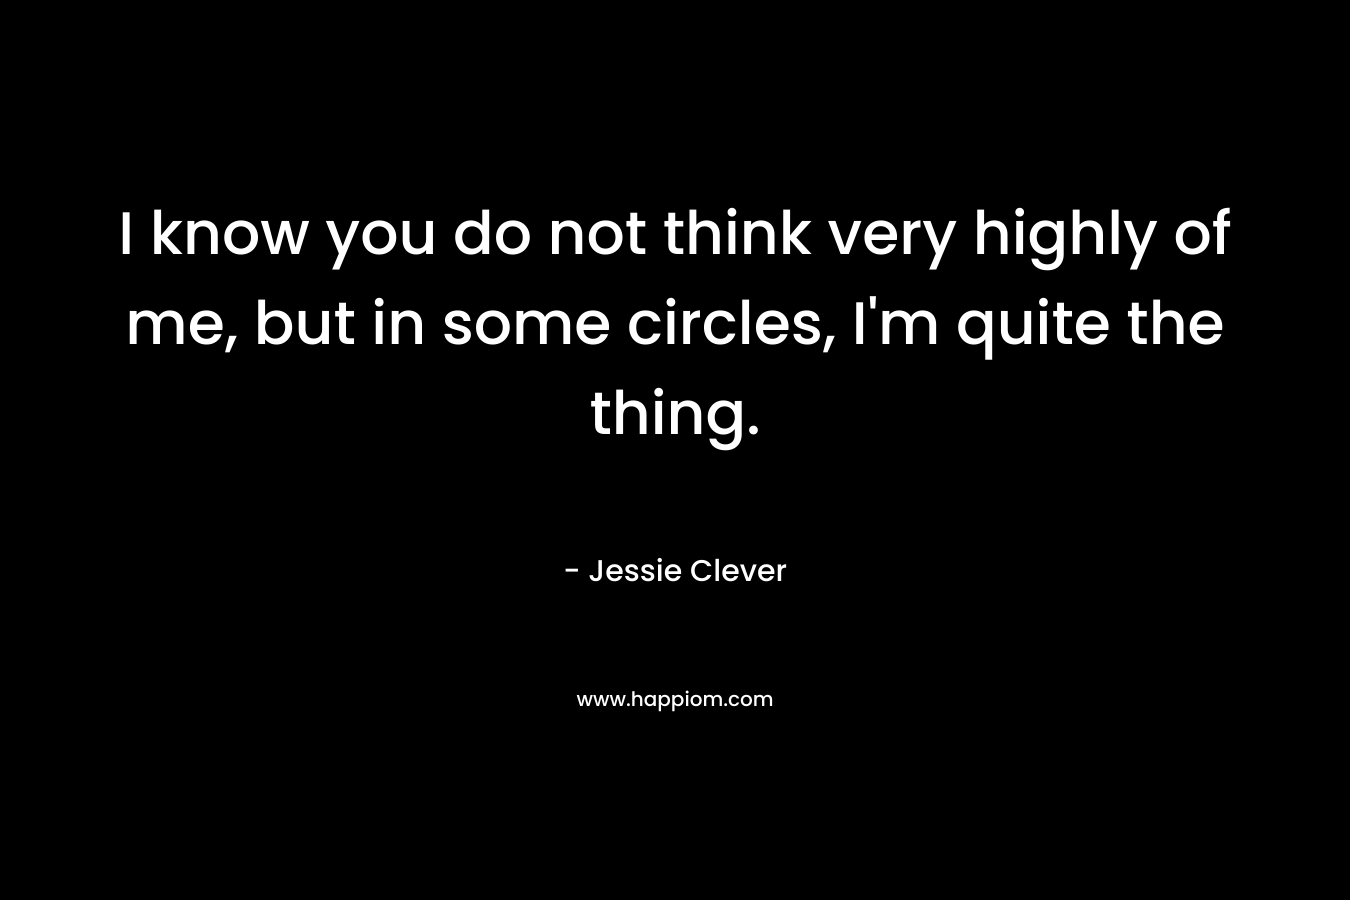 I know you do not think very highly of me, but in some circles, I’m quite the thing. – Jessie Clever